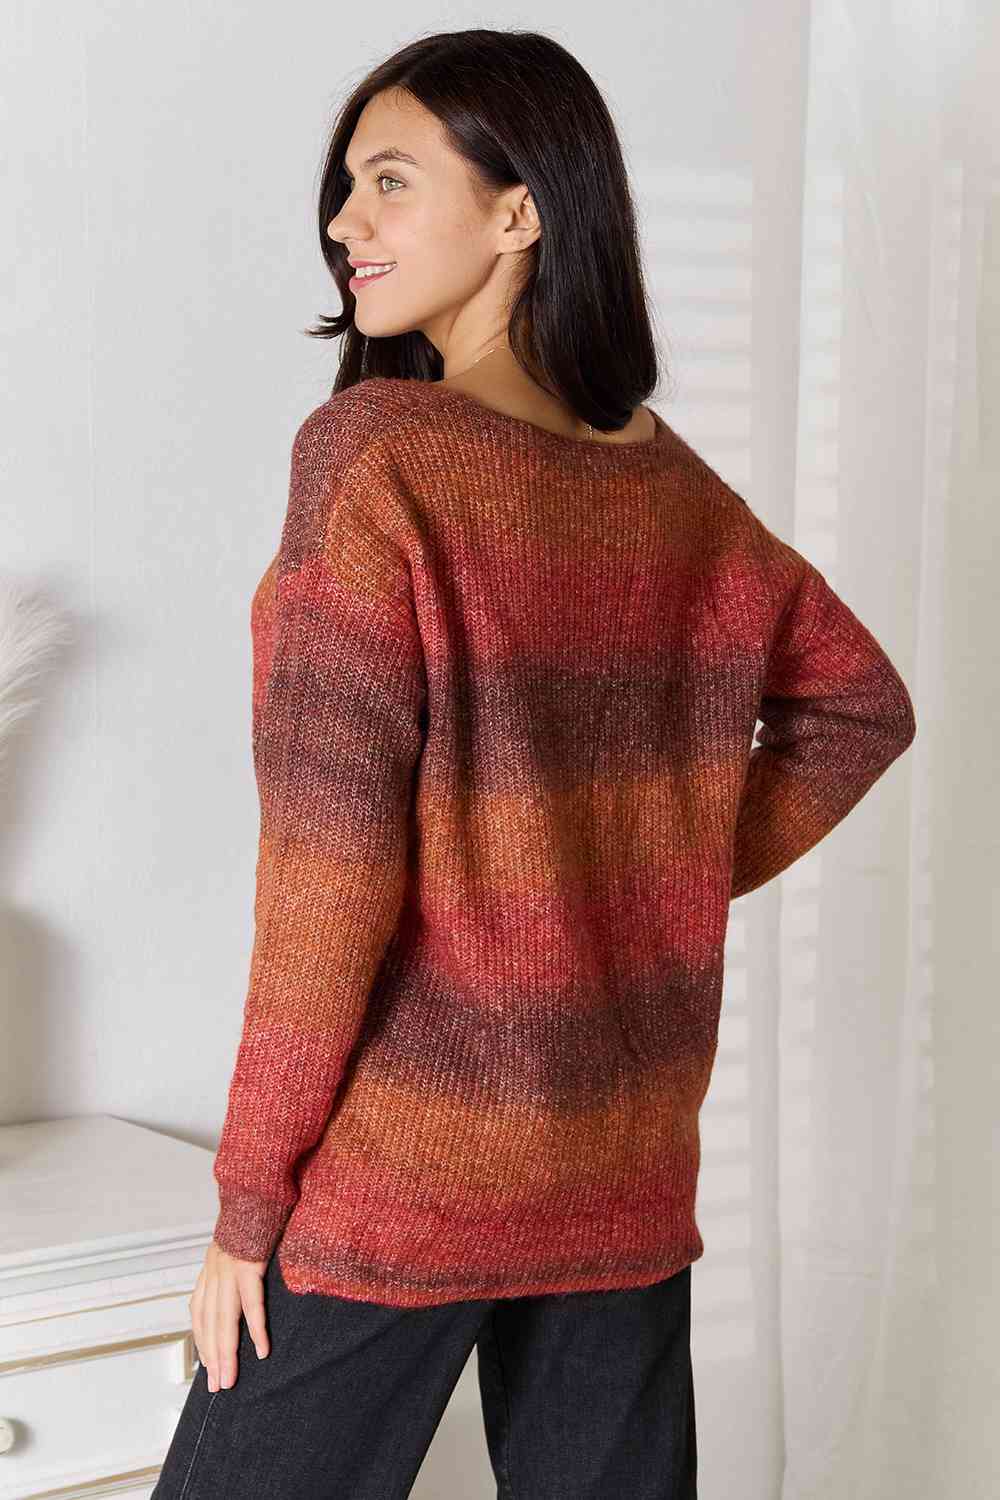 Gray Gradient V-Neck Sweater Sentient Beauty Fashions Apparel & Accessories